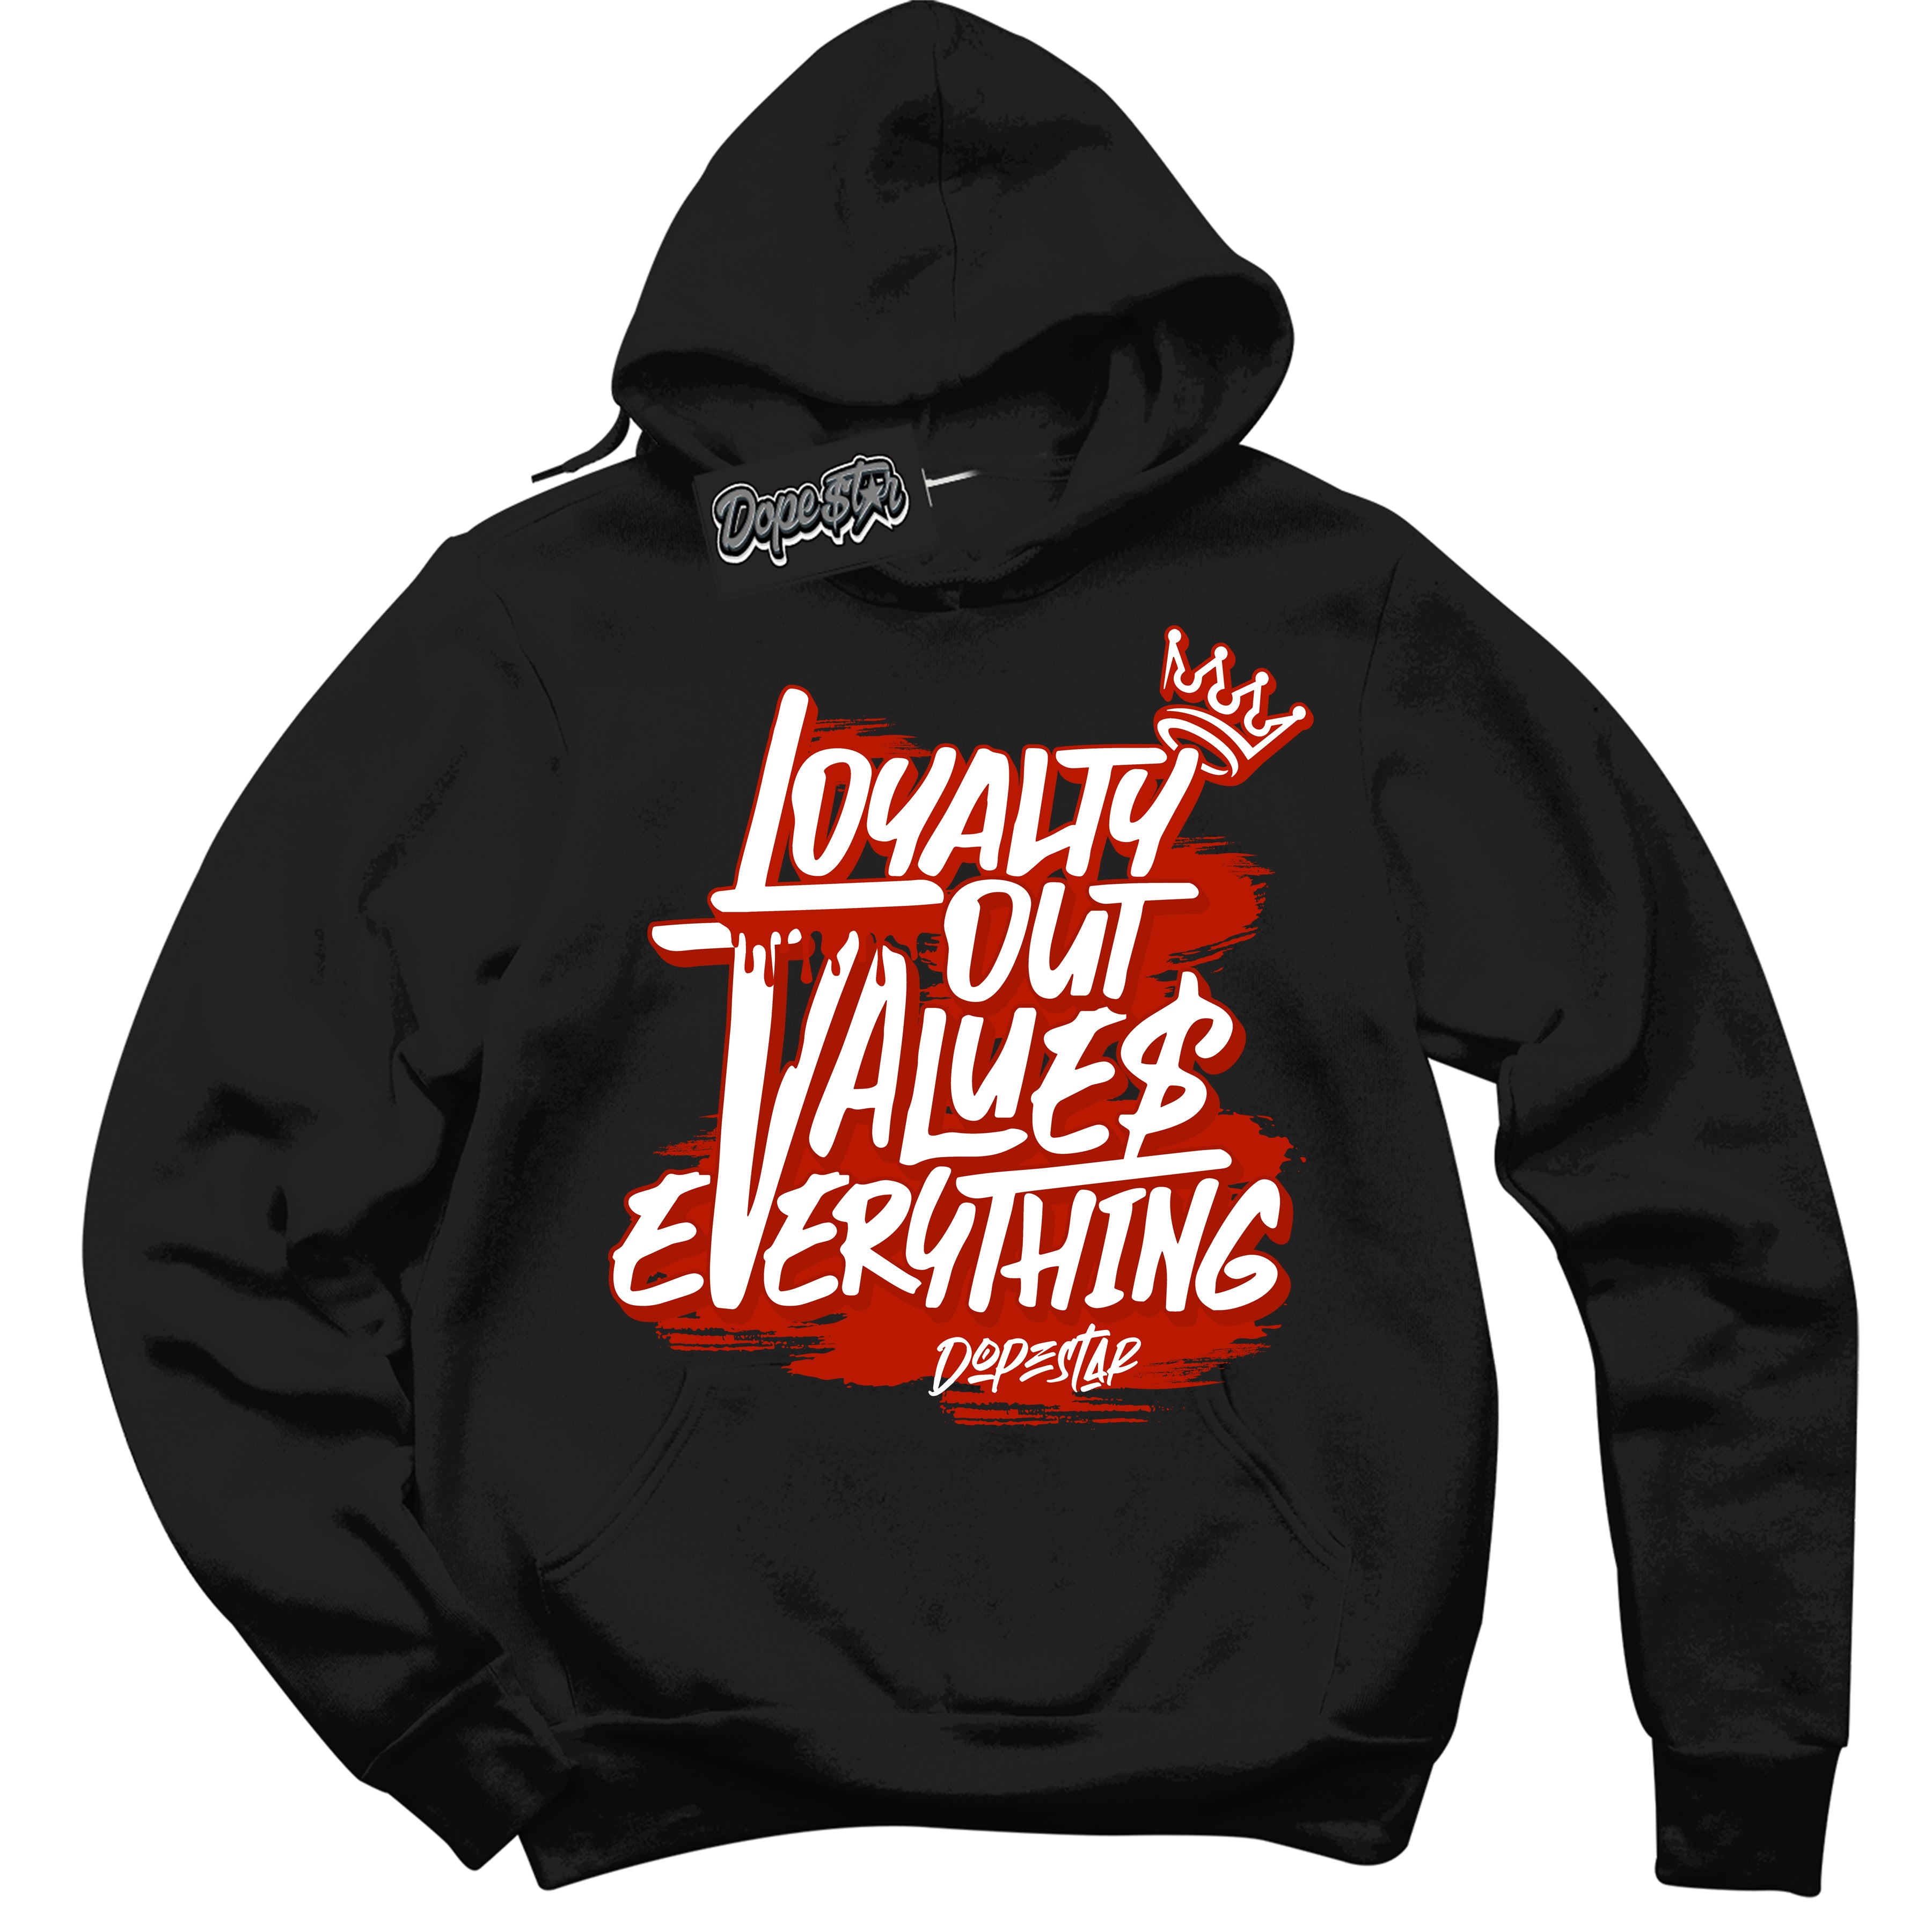 Cool Black Hoodie with “ Loyalty Out Values Everything ”  design that Perfectly Matches  Cherry 11s Sneakers.